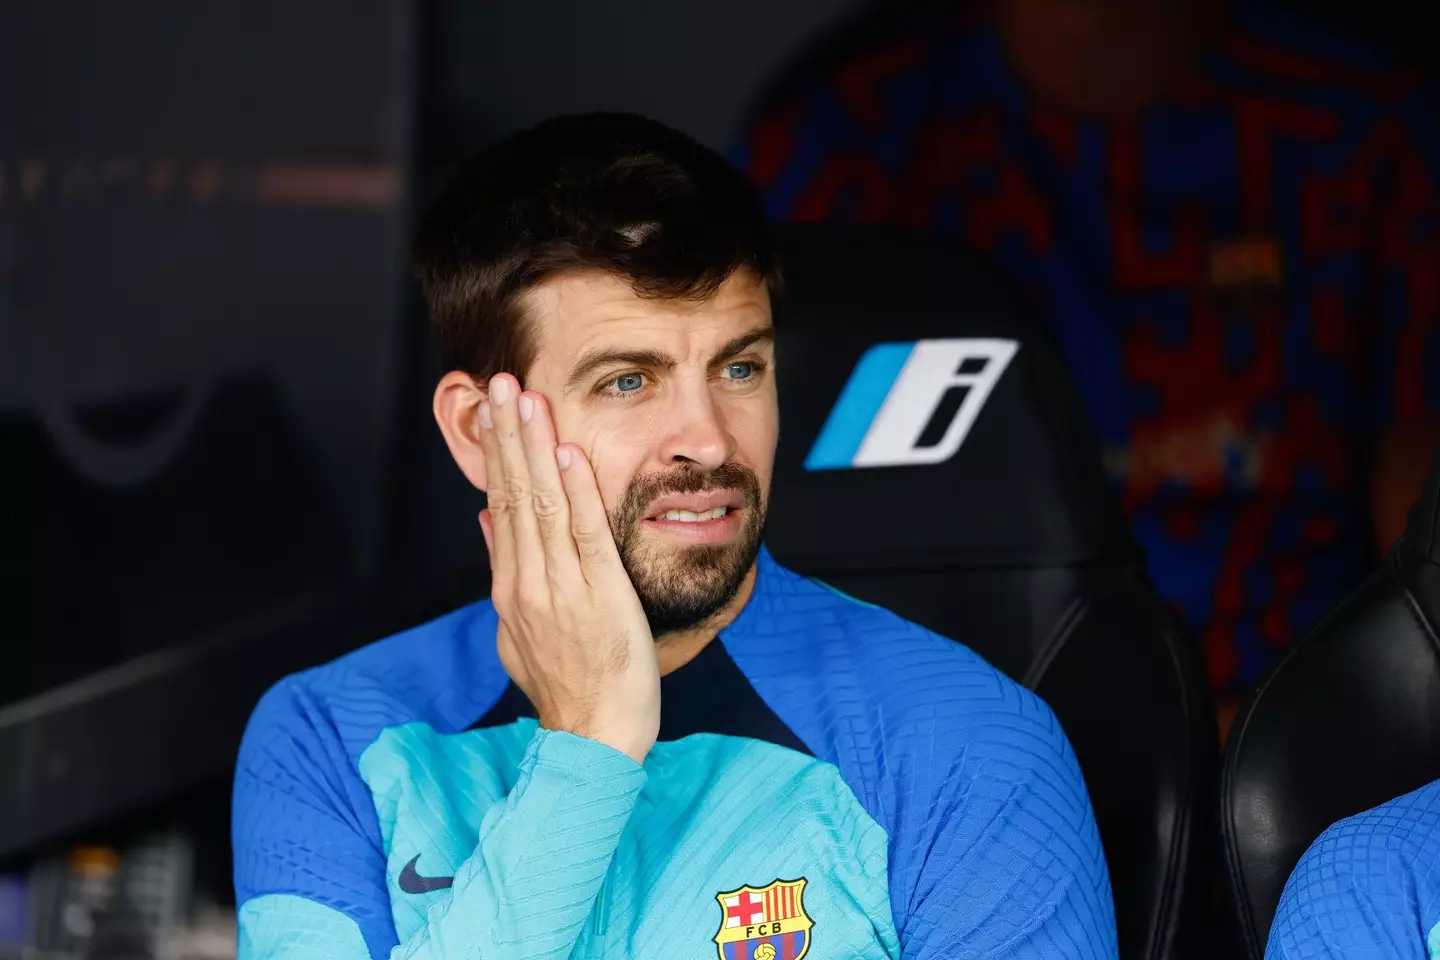 Gerard Piqué has responded to Shakira's diss track about him.